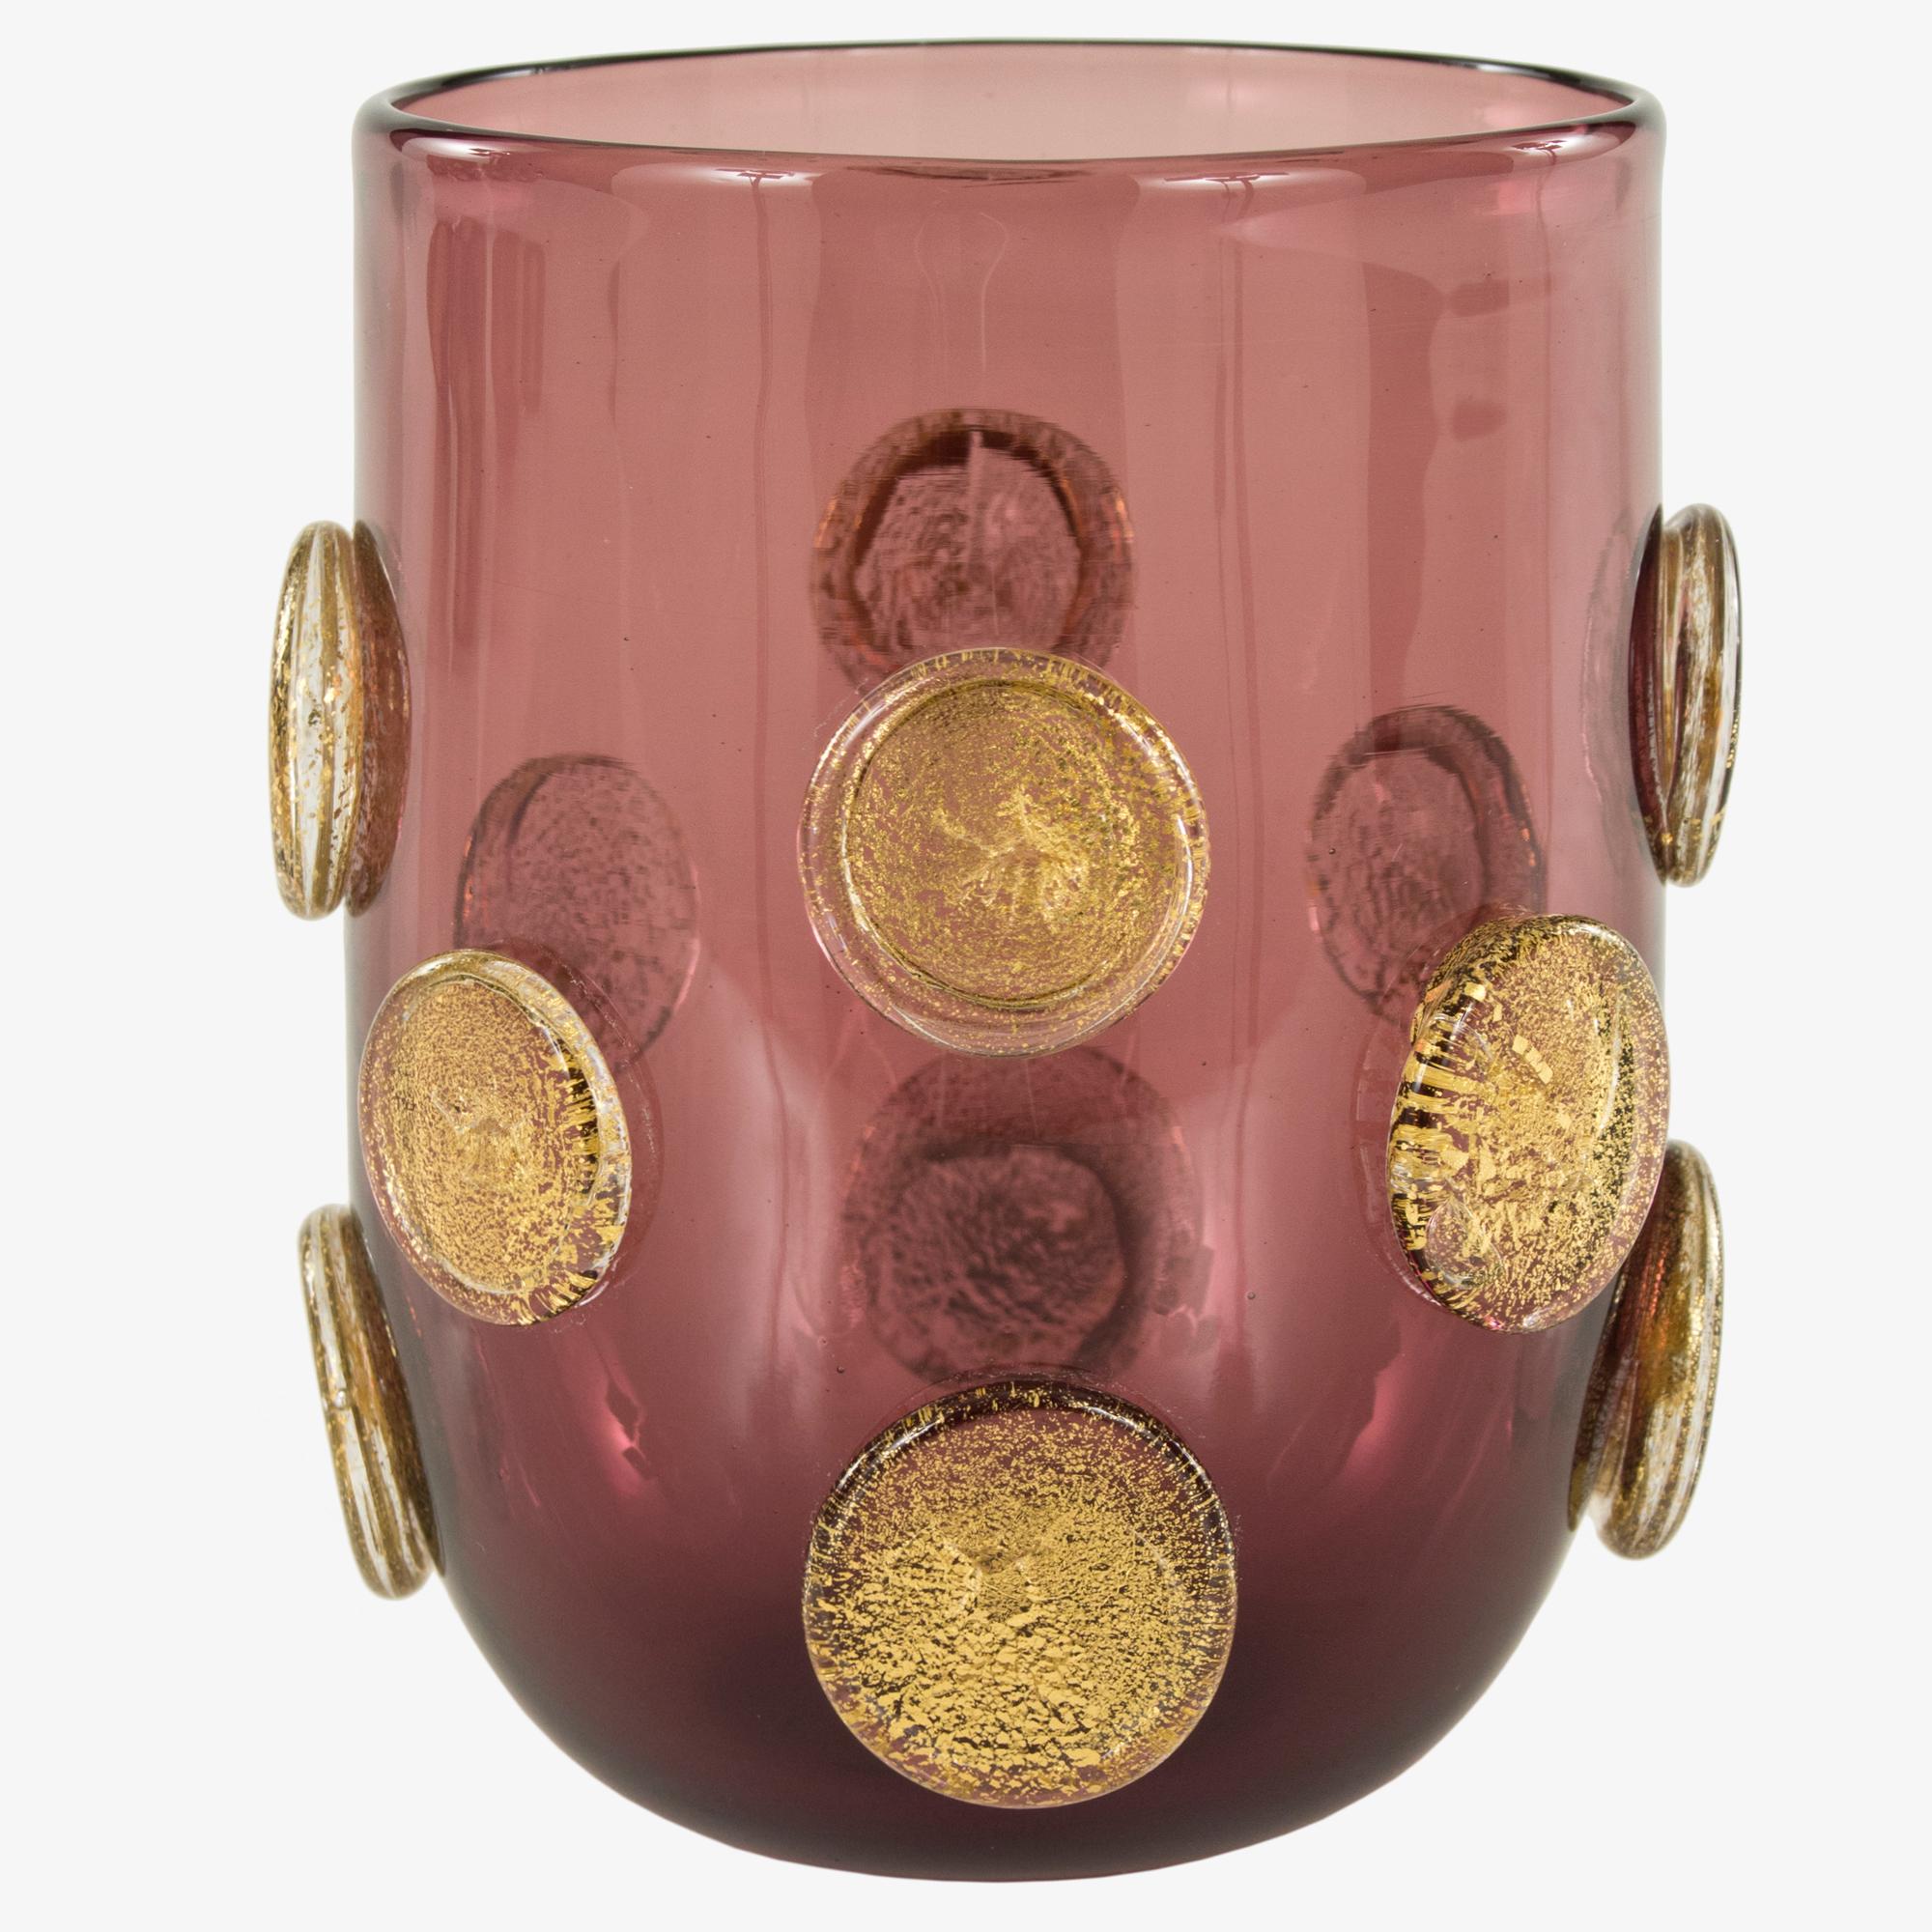 These artistic glasses are handmade by the master artisan in amethyst color with golden leaf round applications.
Every piece differs one from the other.

Precious pieces that can enrich every table.

The handcrafted soul of our lighting products is